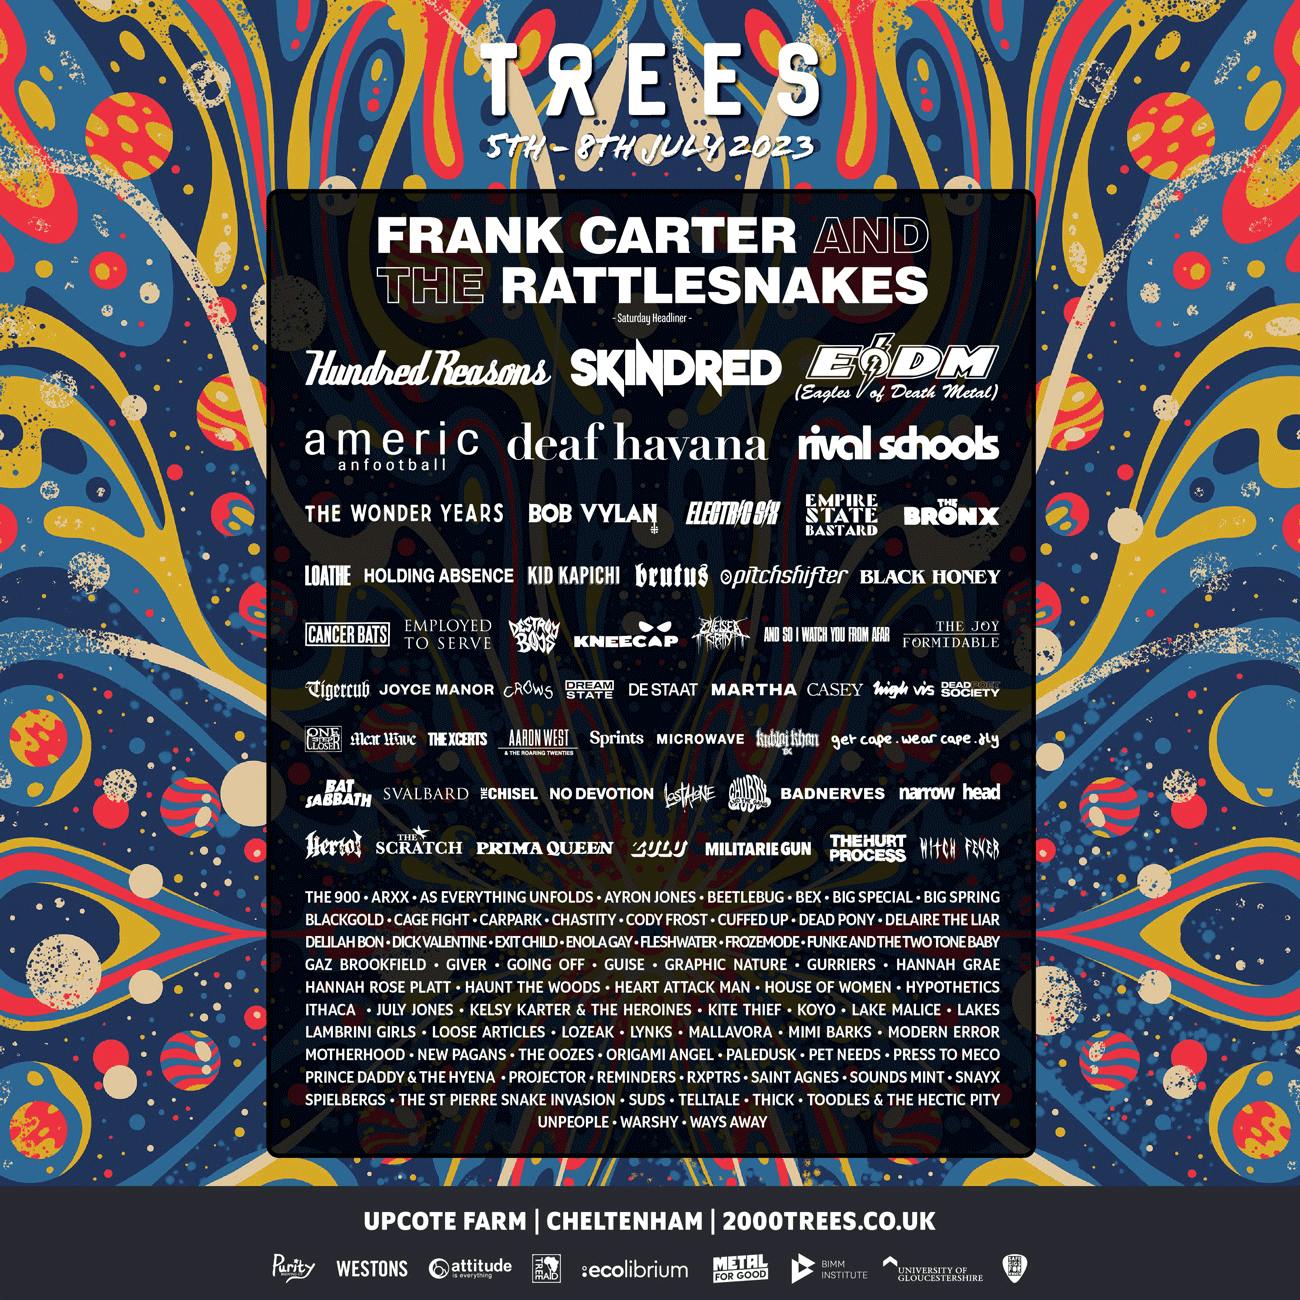 2000trees-February-2023-updated-poster.png?auto=compress&fit=max&w=3840